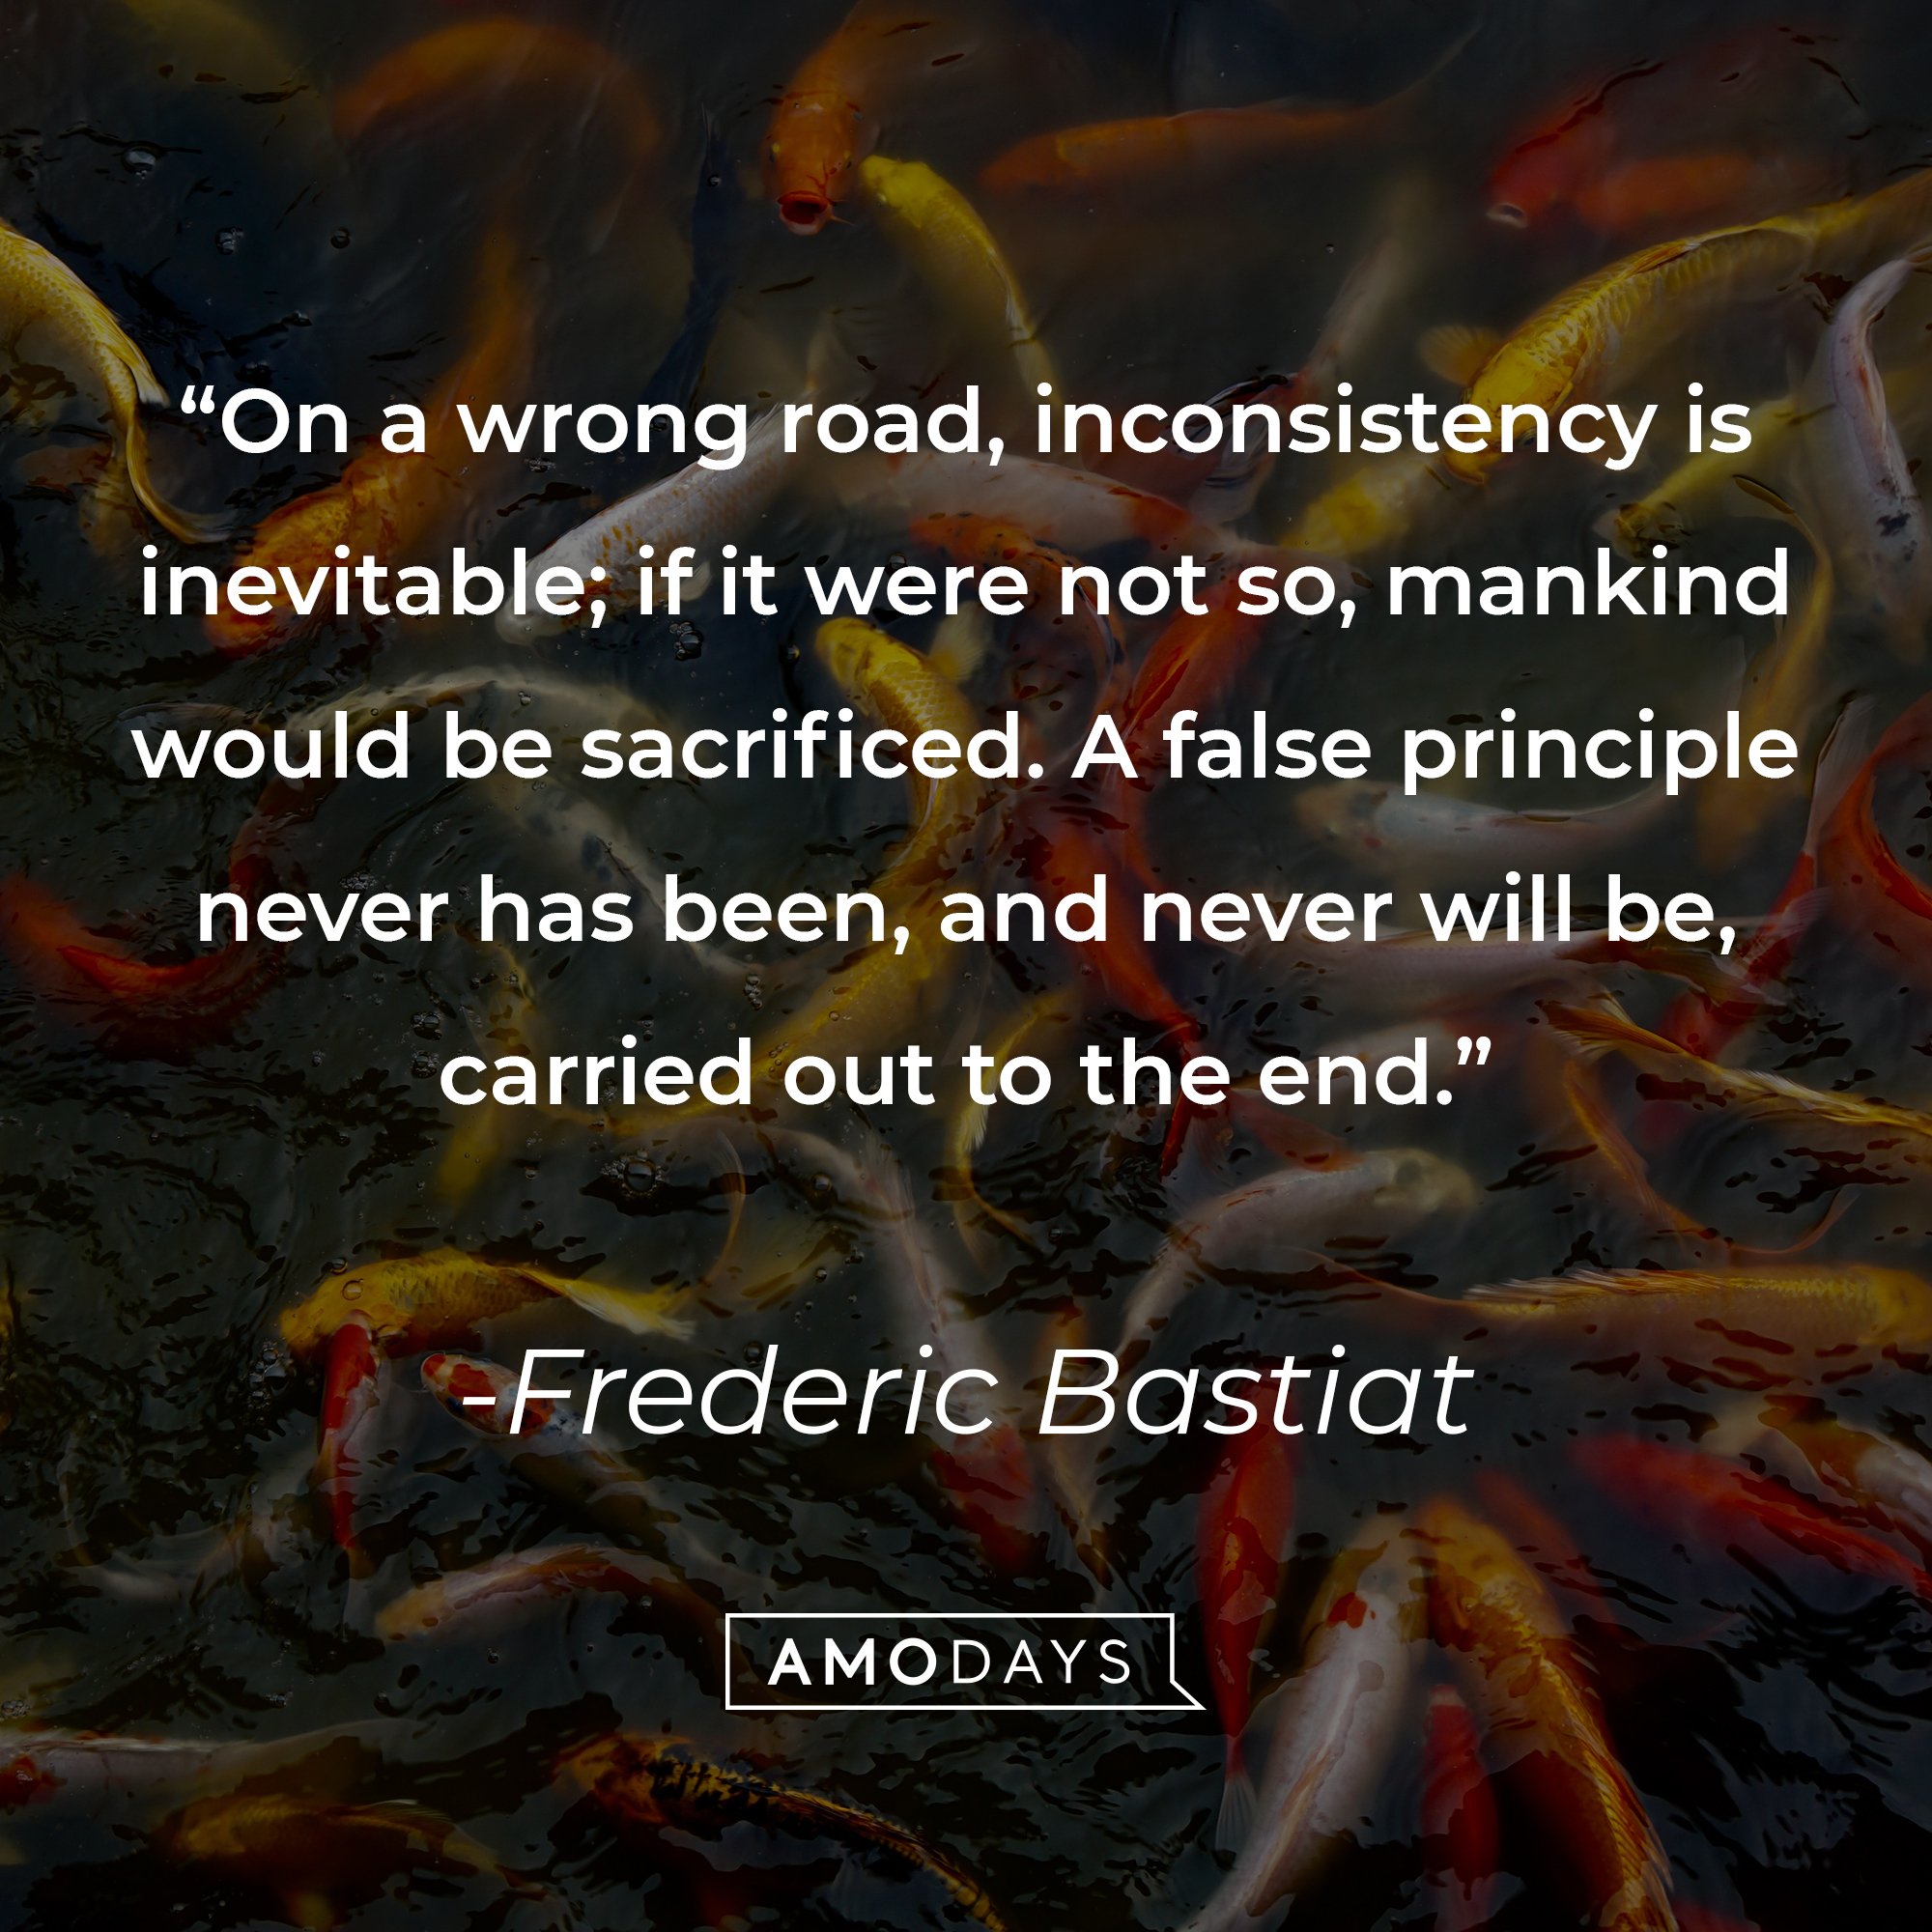 Frederic Bastiat's quote: "On a wrong road, inconsistency is inevitable; if it were not so, mankind would be sacrificed. A false principle never has been, and never will be, carried out to the end." | Image: AmoDays